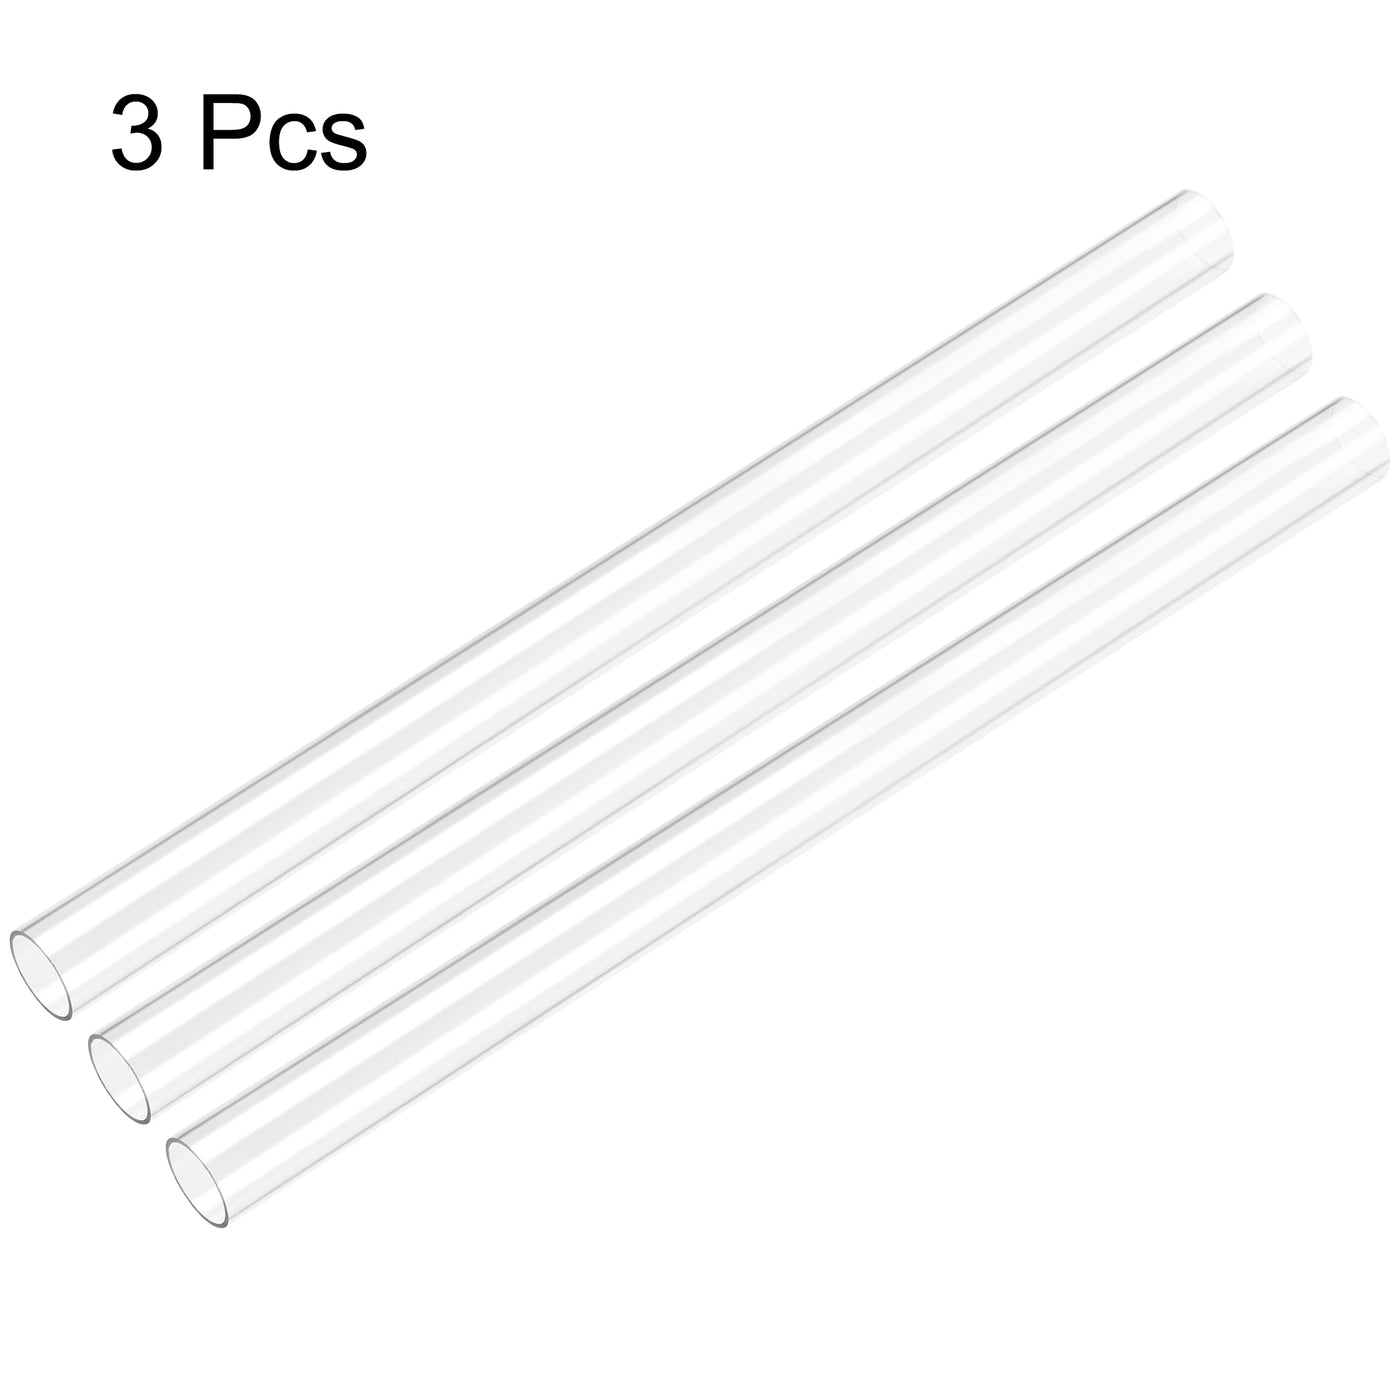 Uxcell Uxcell PC Rigid Round Clear Tubing 18mm(0.7 Inch)IDx20mm(0.79 Inch)ODx305mm(1Ft) Length Plastic Tube 3pcs